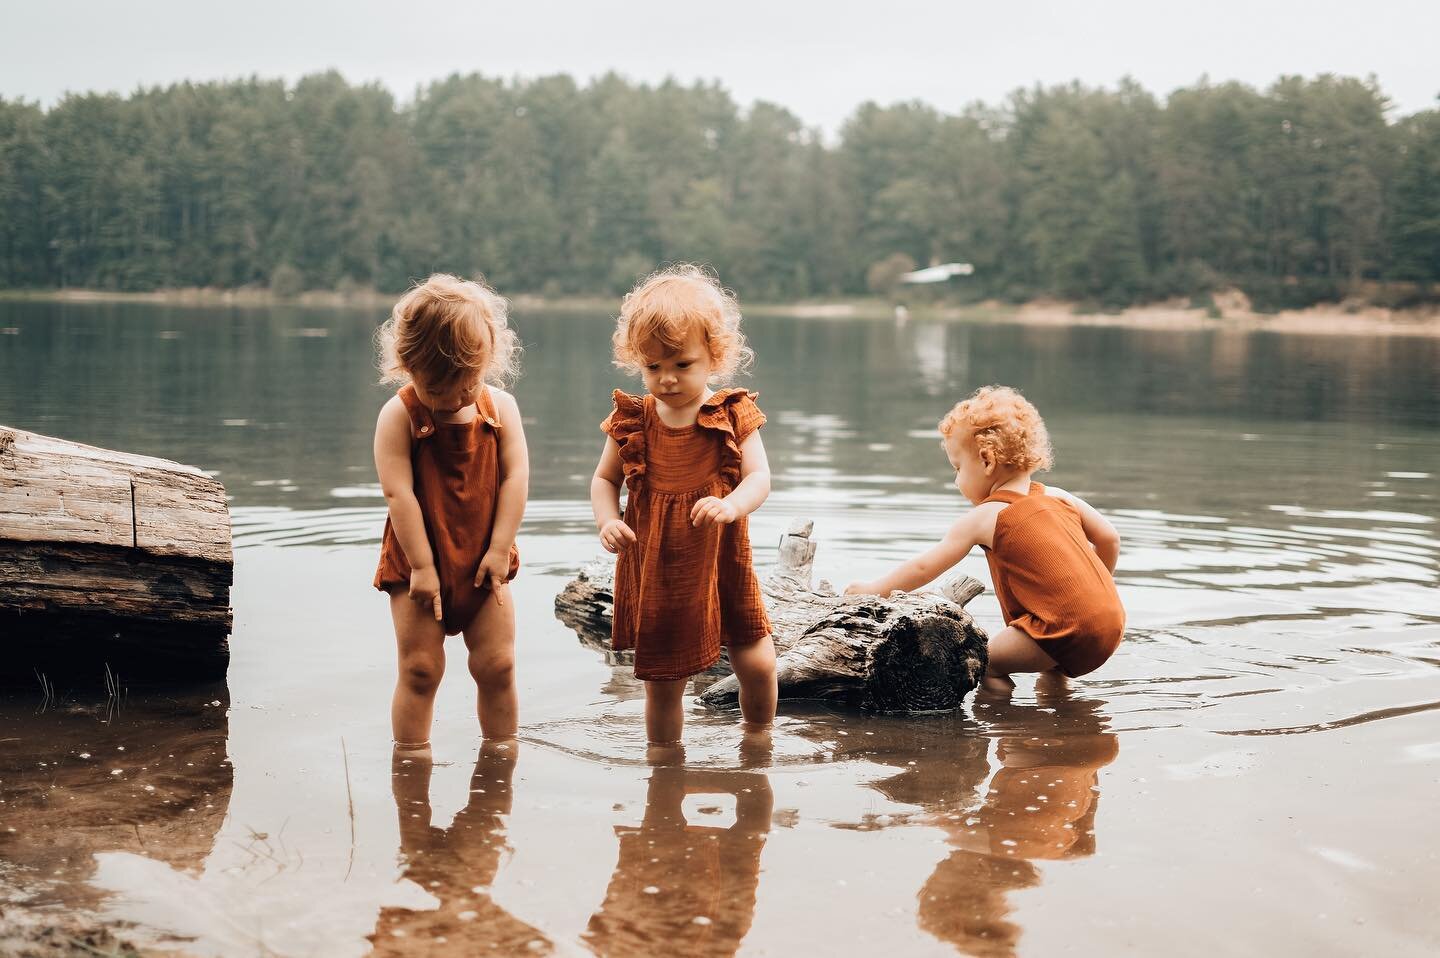 As some of you may have saw, we booked a two night camping trip in the state forest 20 minutes from our house over the weekend. This was the first of many for the triplets, as my most favorite memories from growing up are of camping with my family an